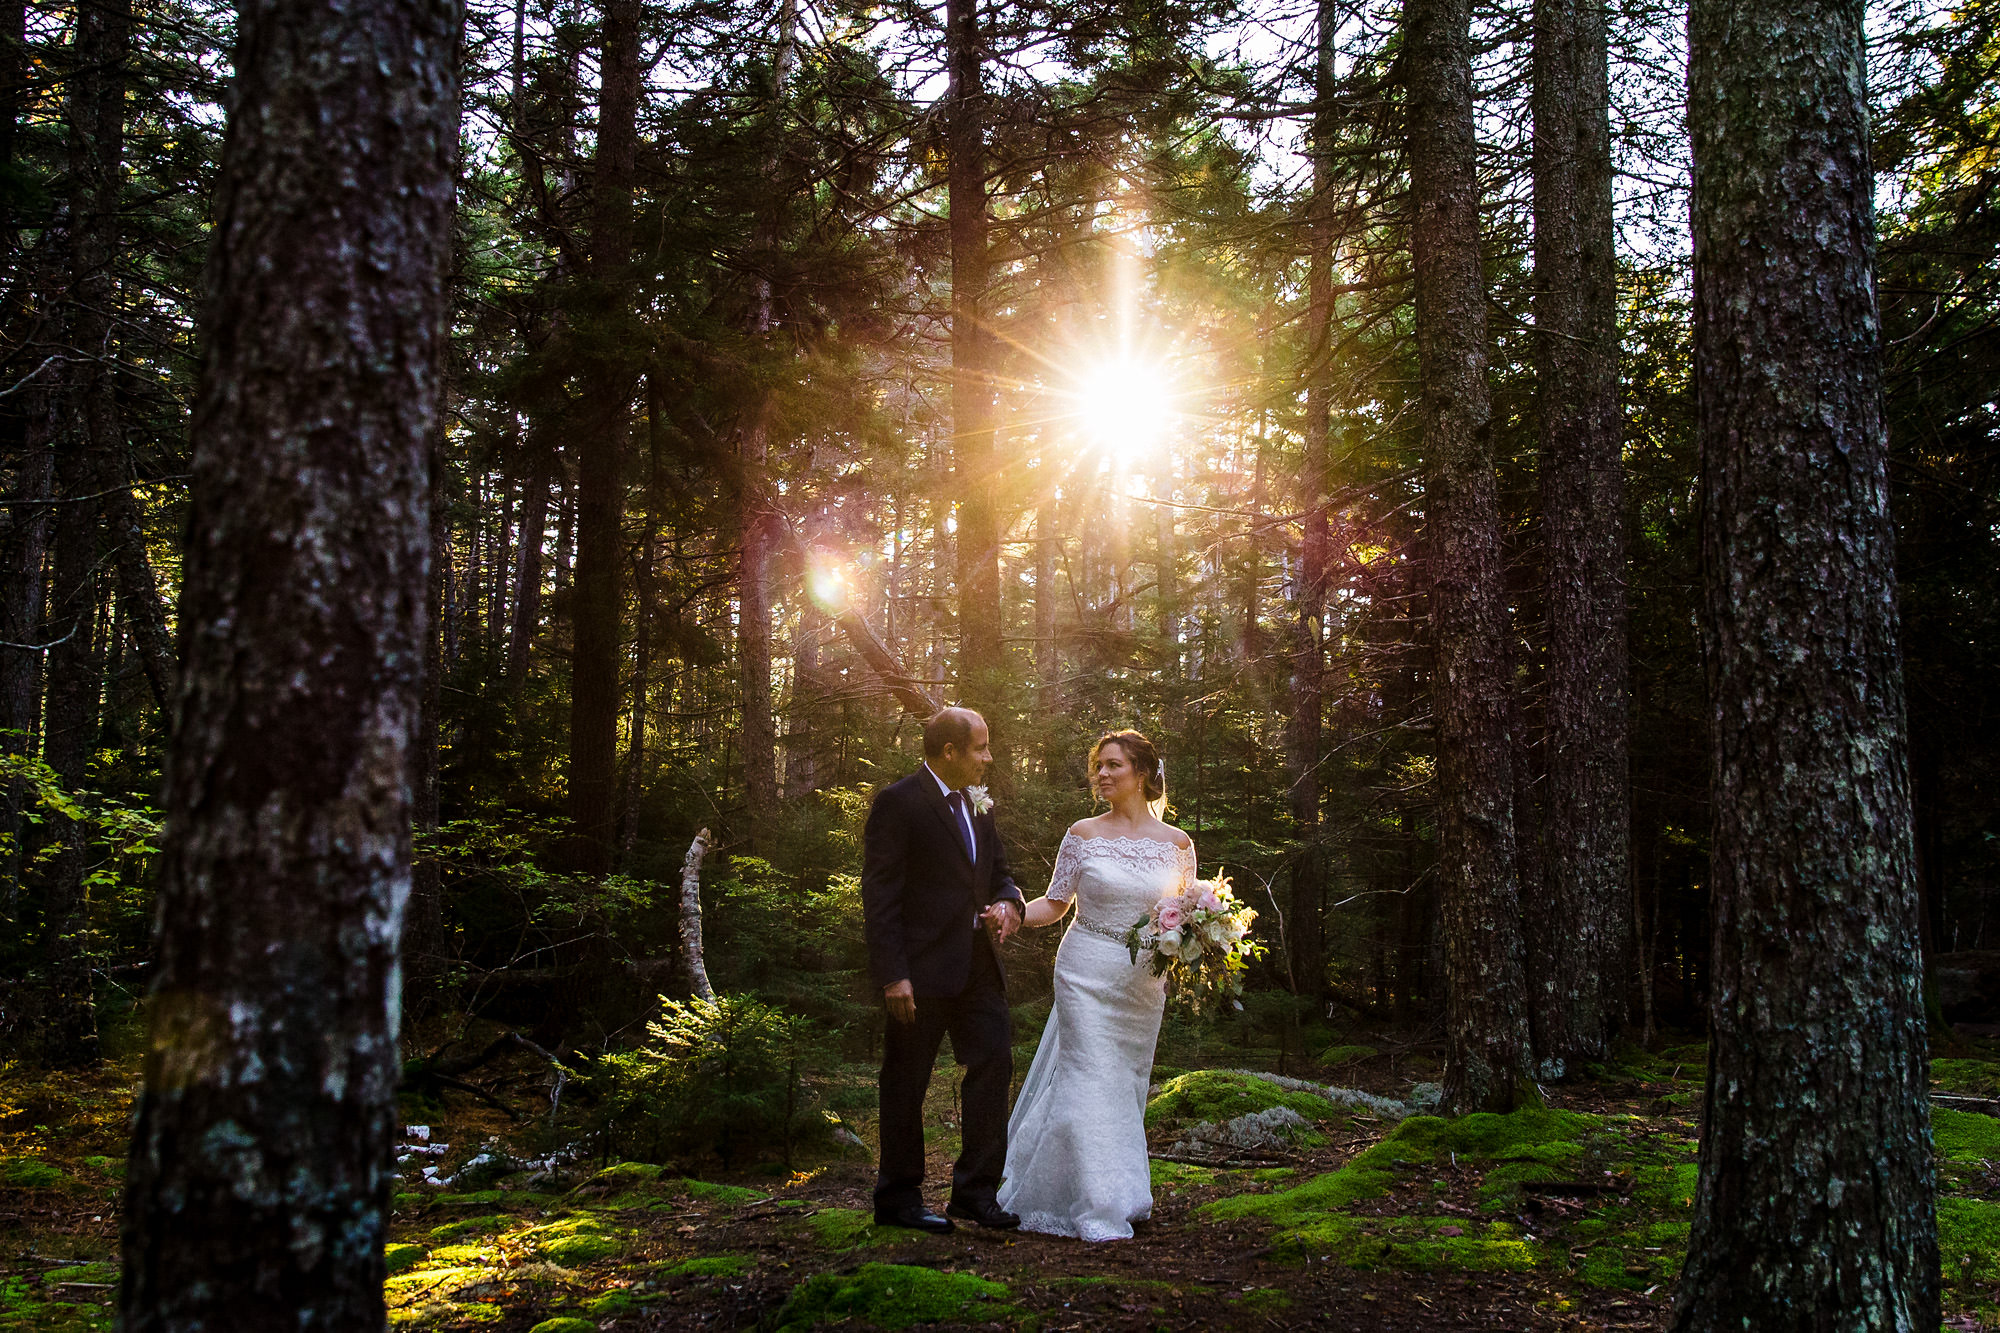 Elopement portraits in the woods at Acadia National Park